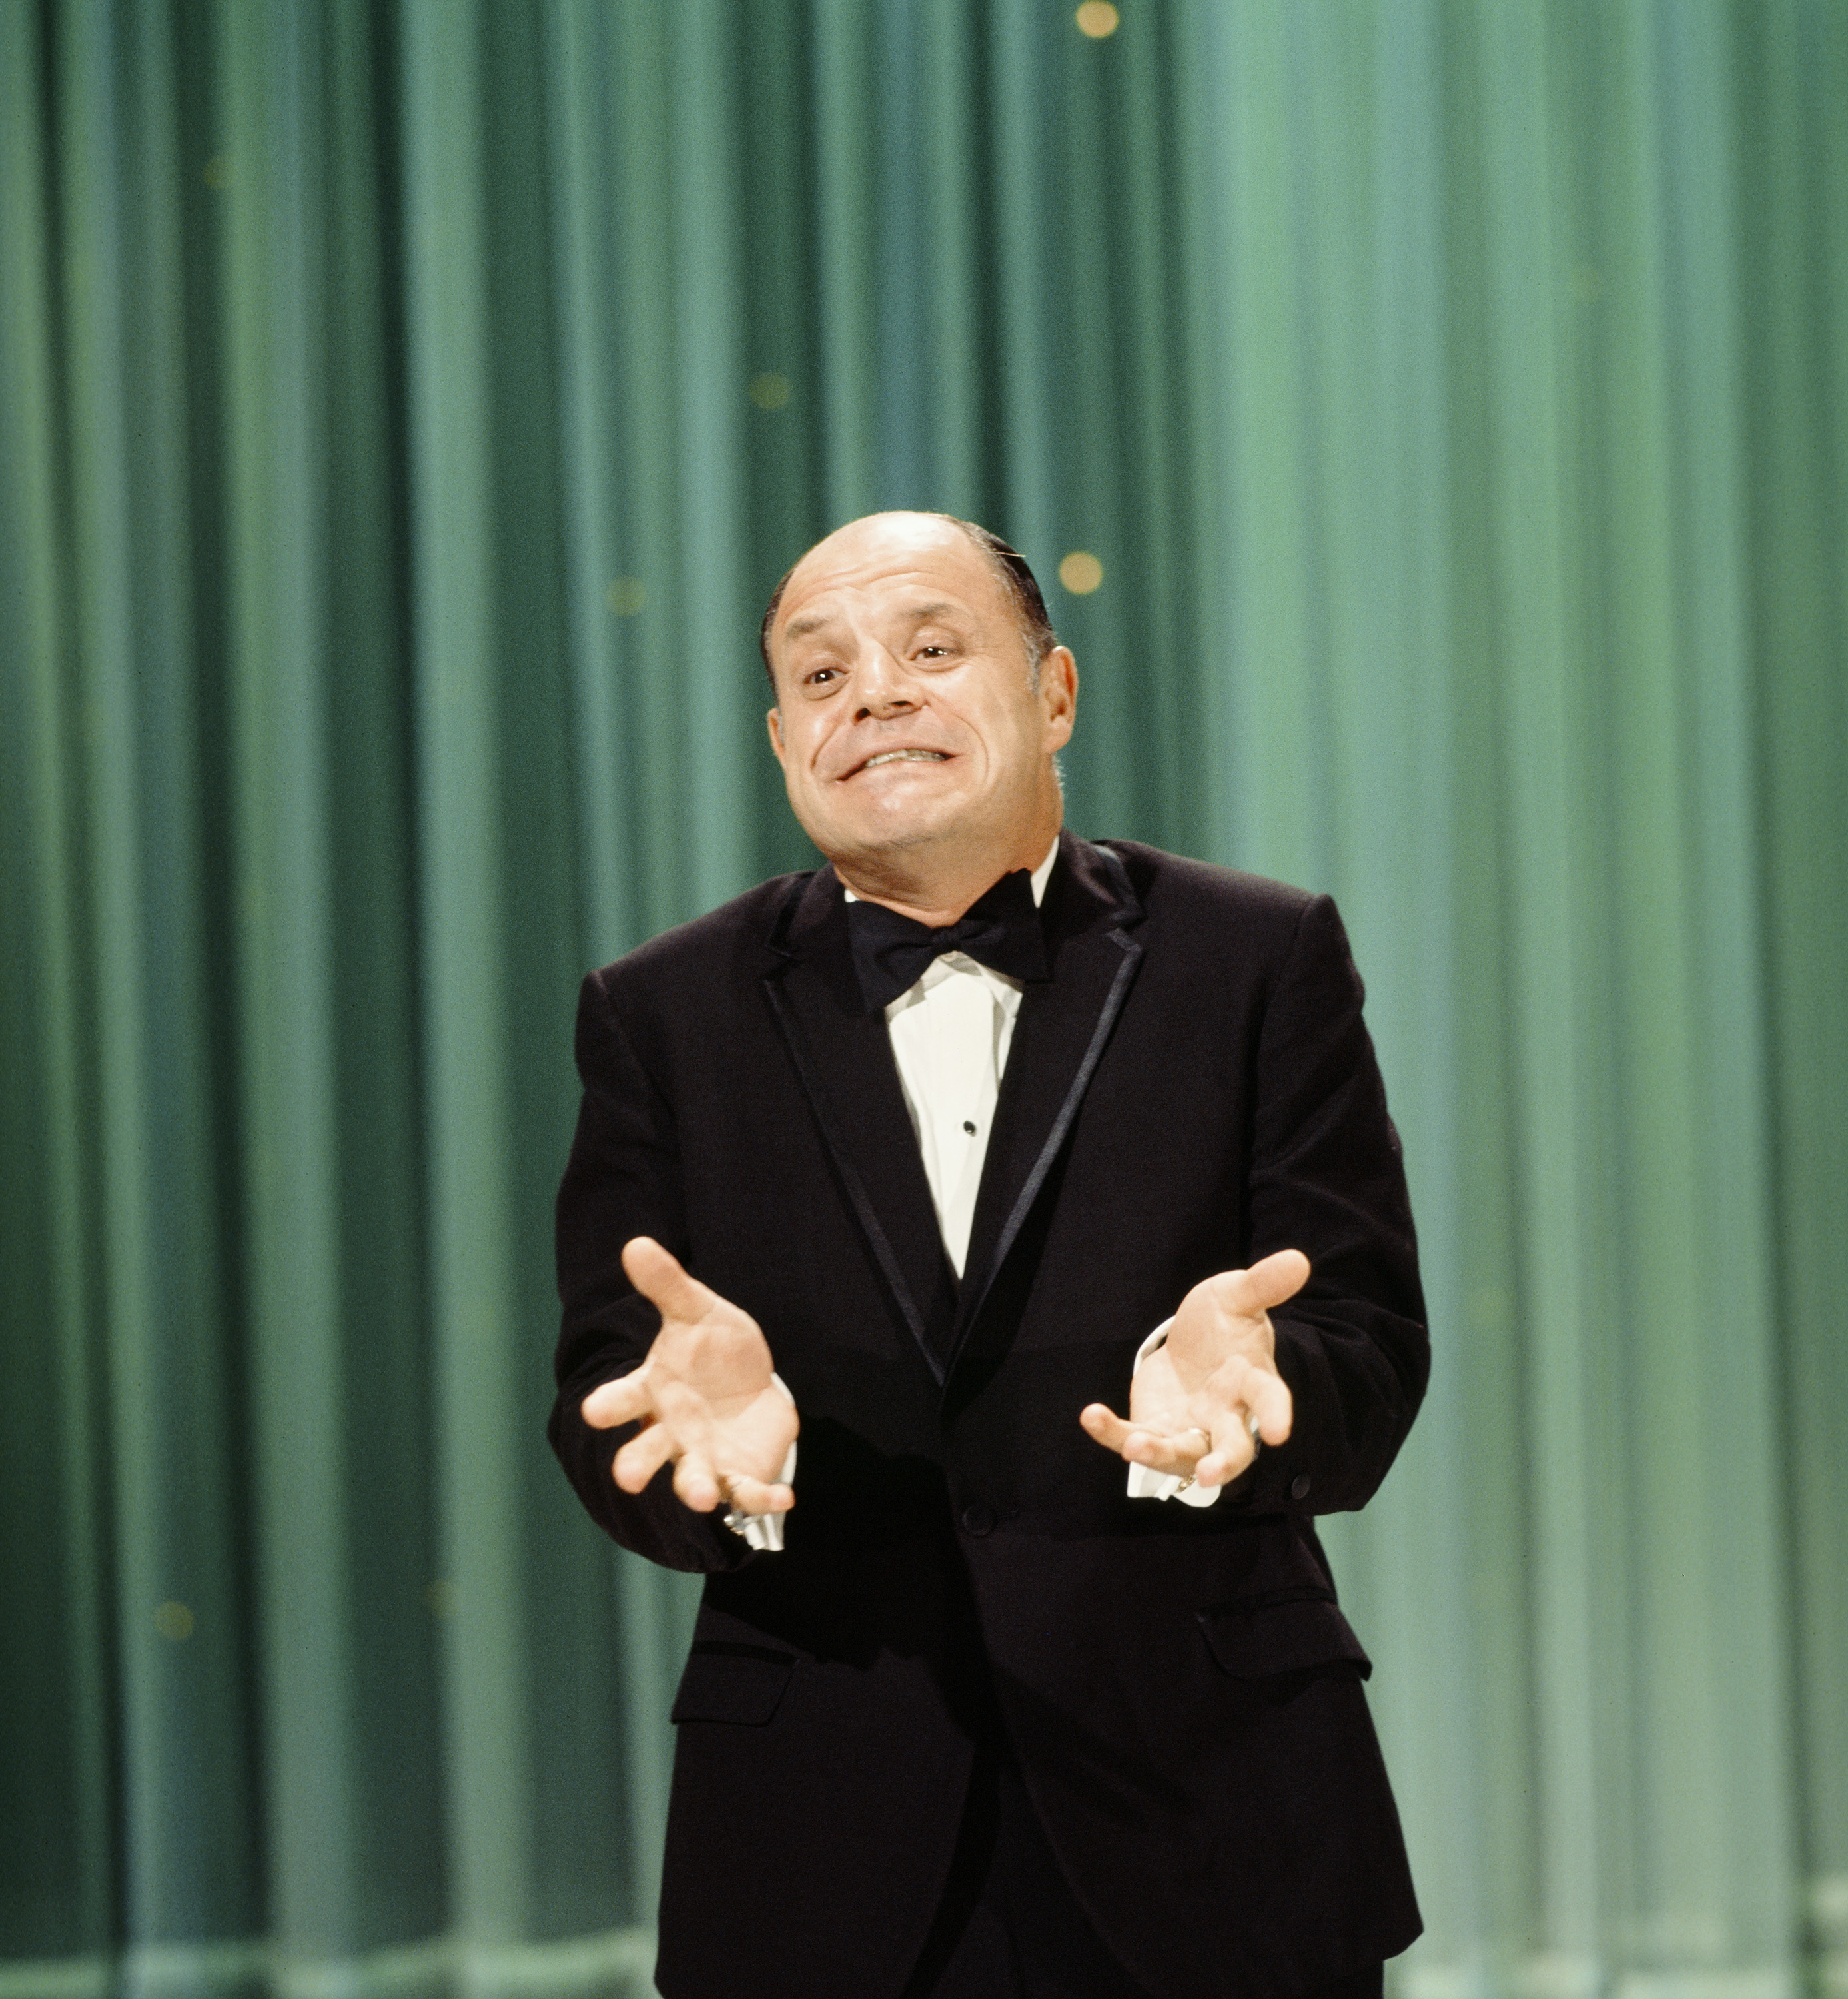 The comedian and actor on "The Kraft Music Hall" on Sept. 18, 1968. (NBC/NBCU Photo Bank/Getty Images)